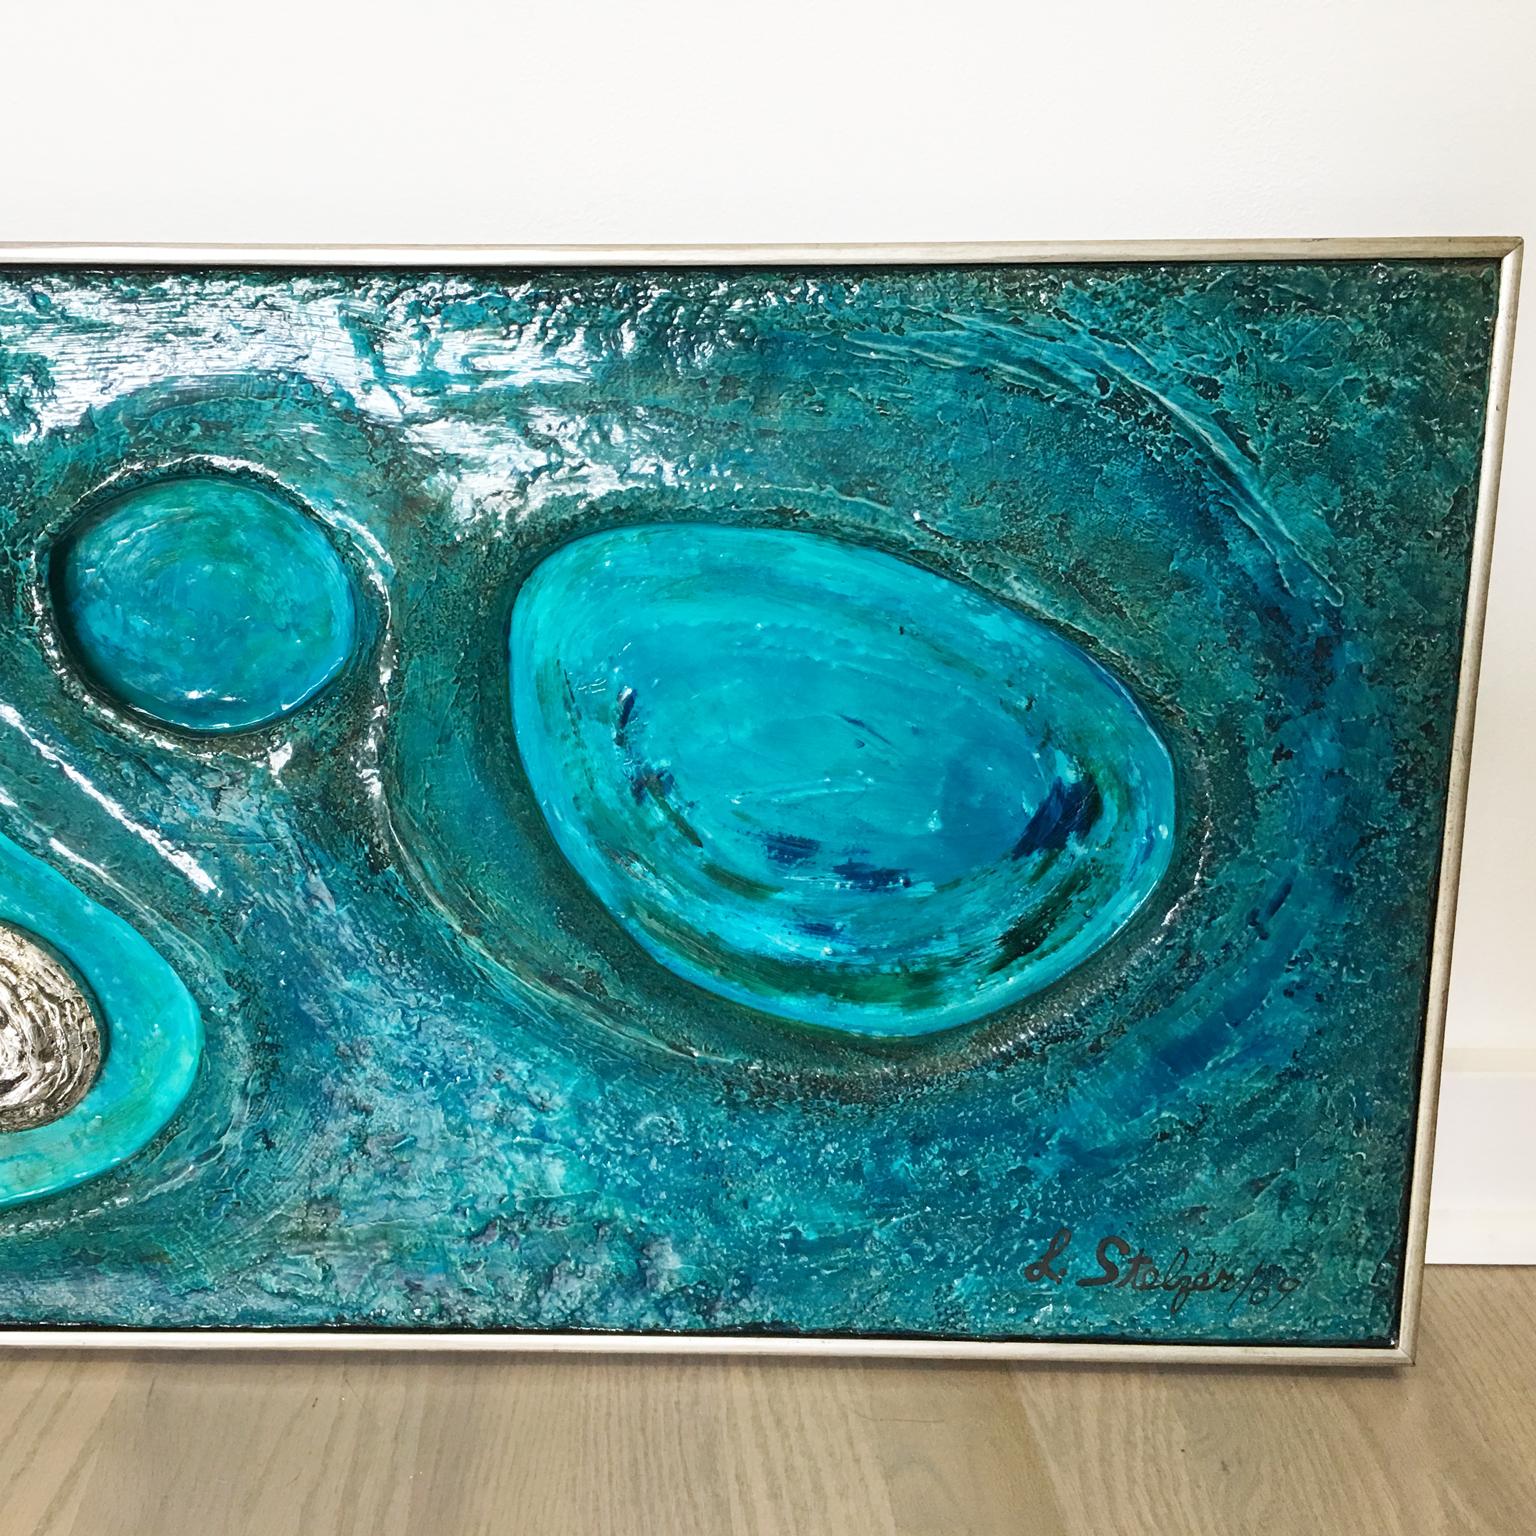 Psychedelic Turquoise Acrylic Resin Art Wall Sculpture Panel by Lorraine Stelzer For Sale 7